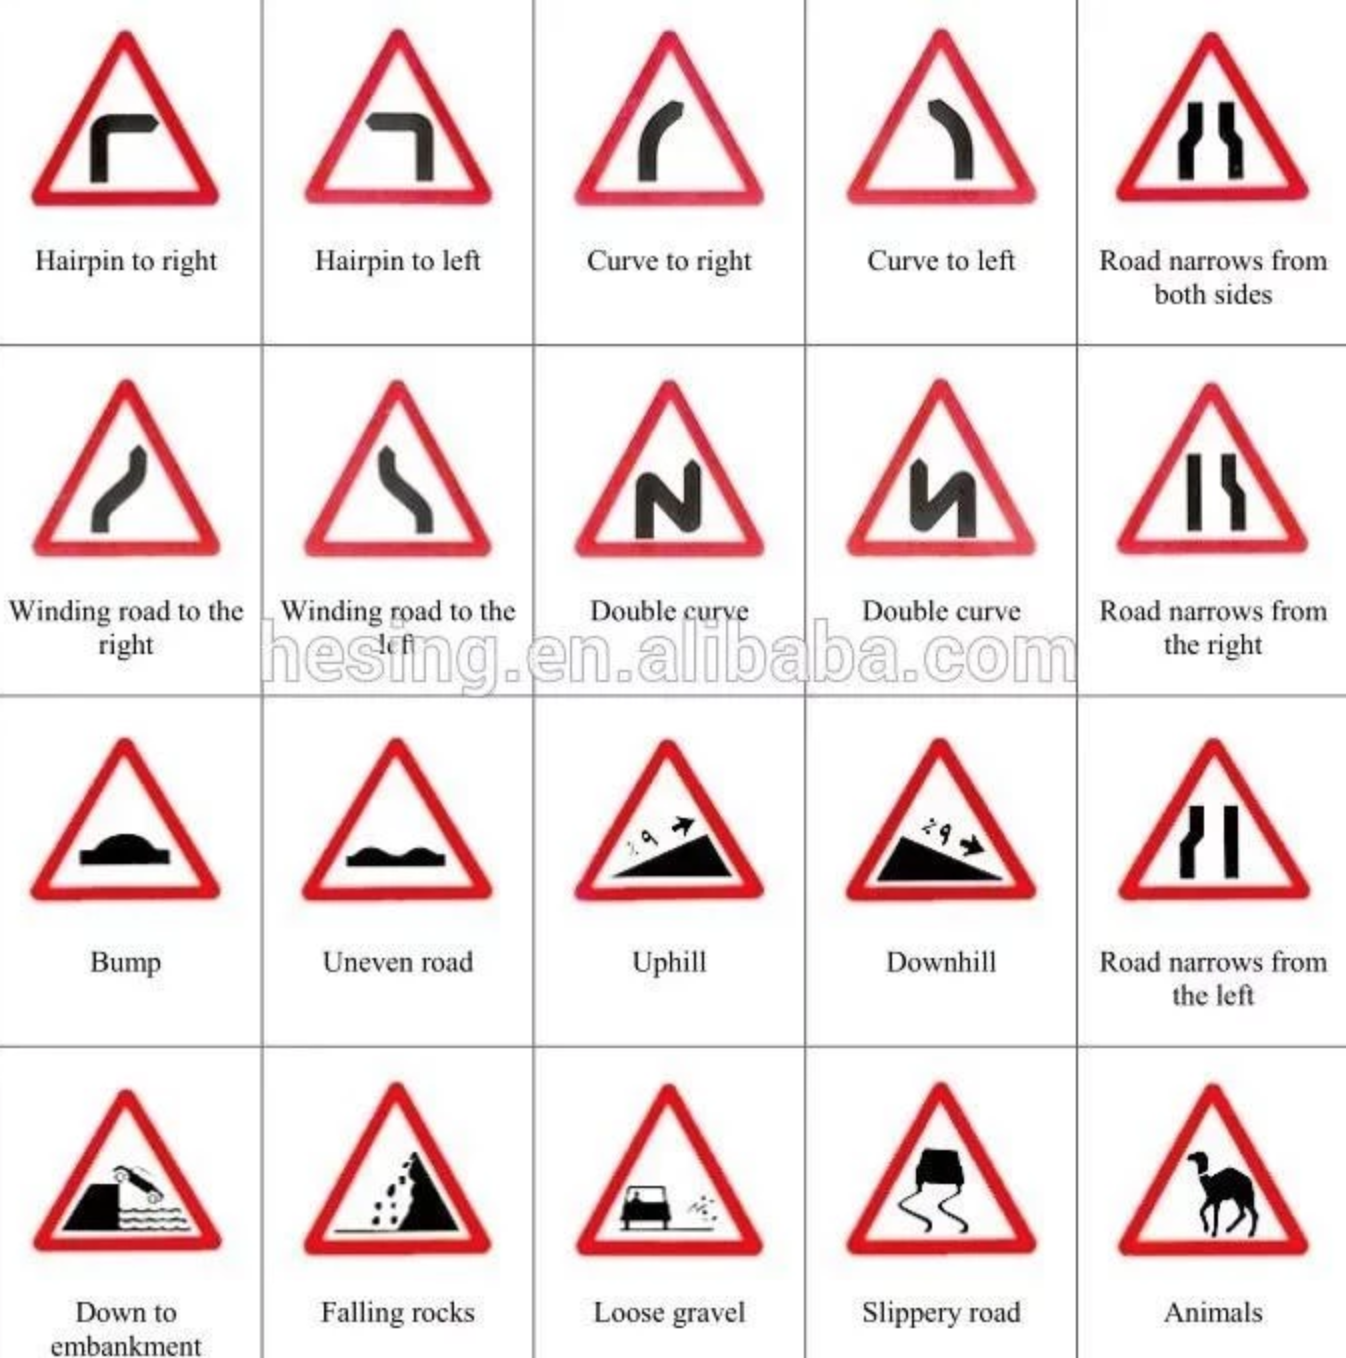 road-signs-and-their-meanings-reverasite